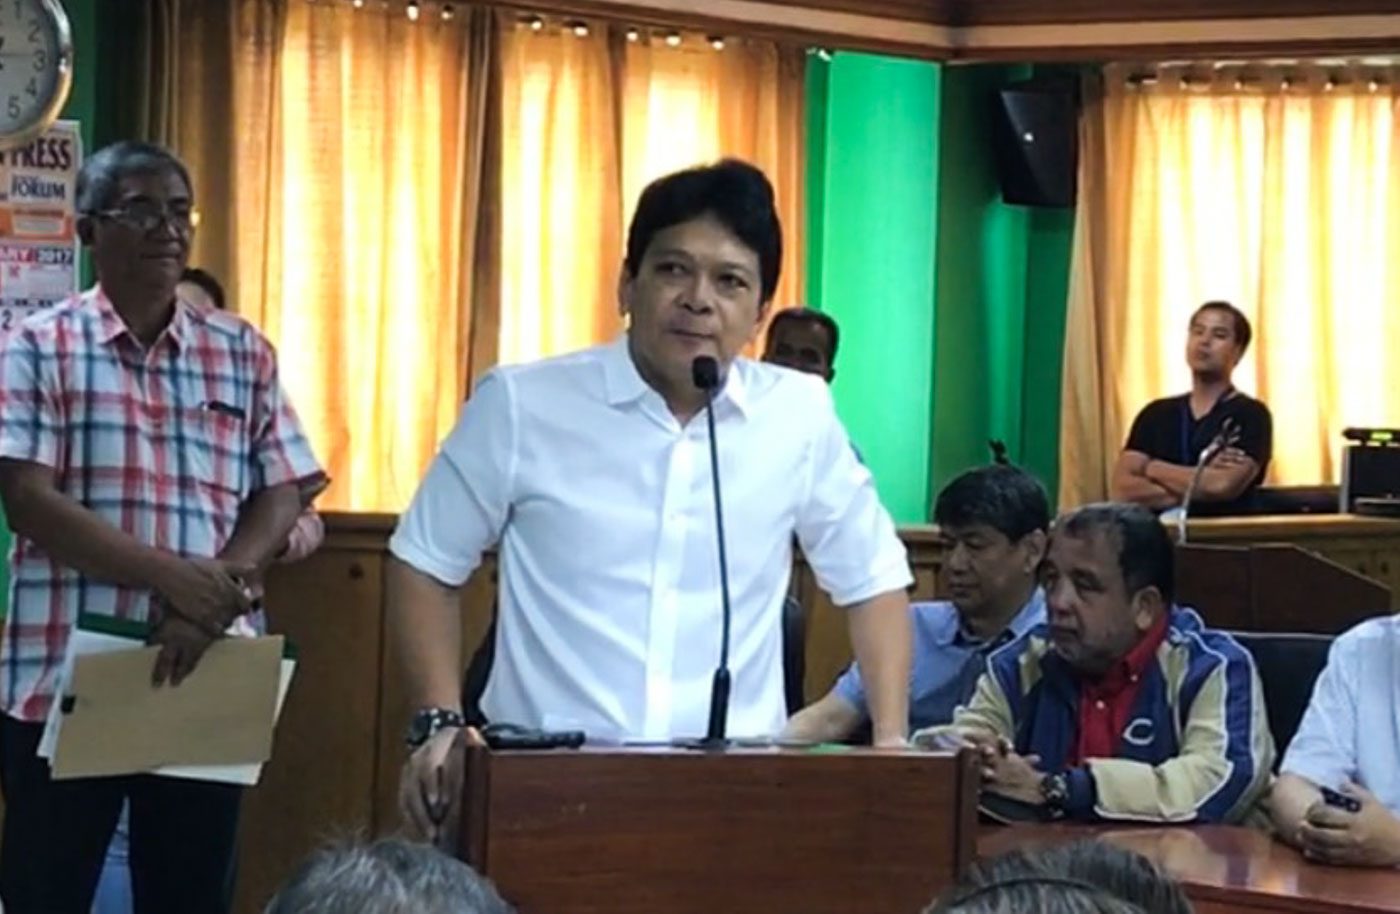 Tuguegarao mayor Soriano steps down to focus on court fight